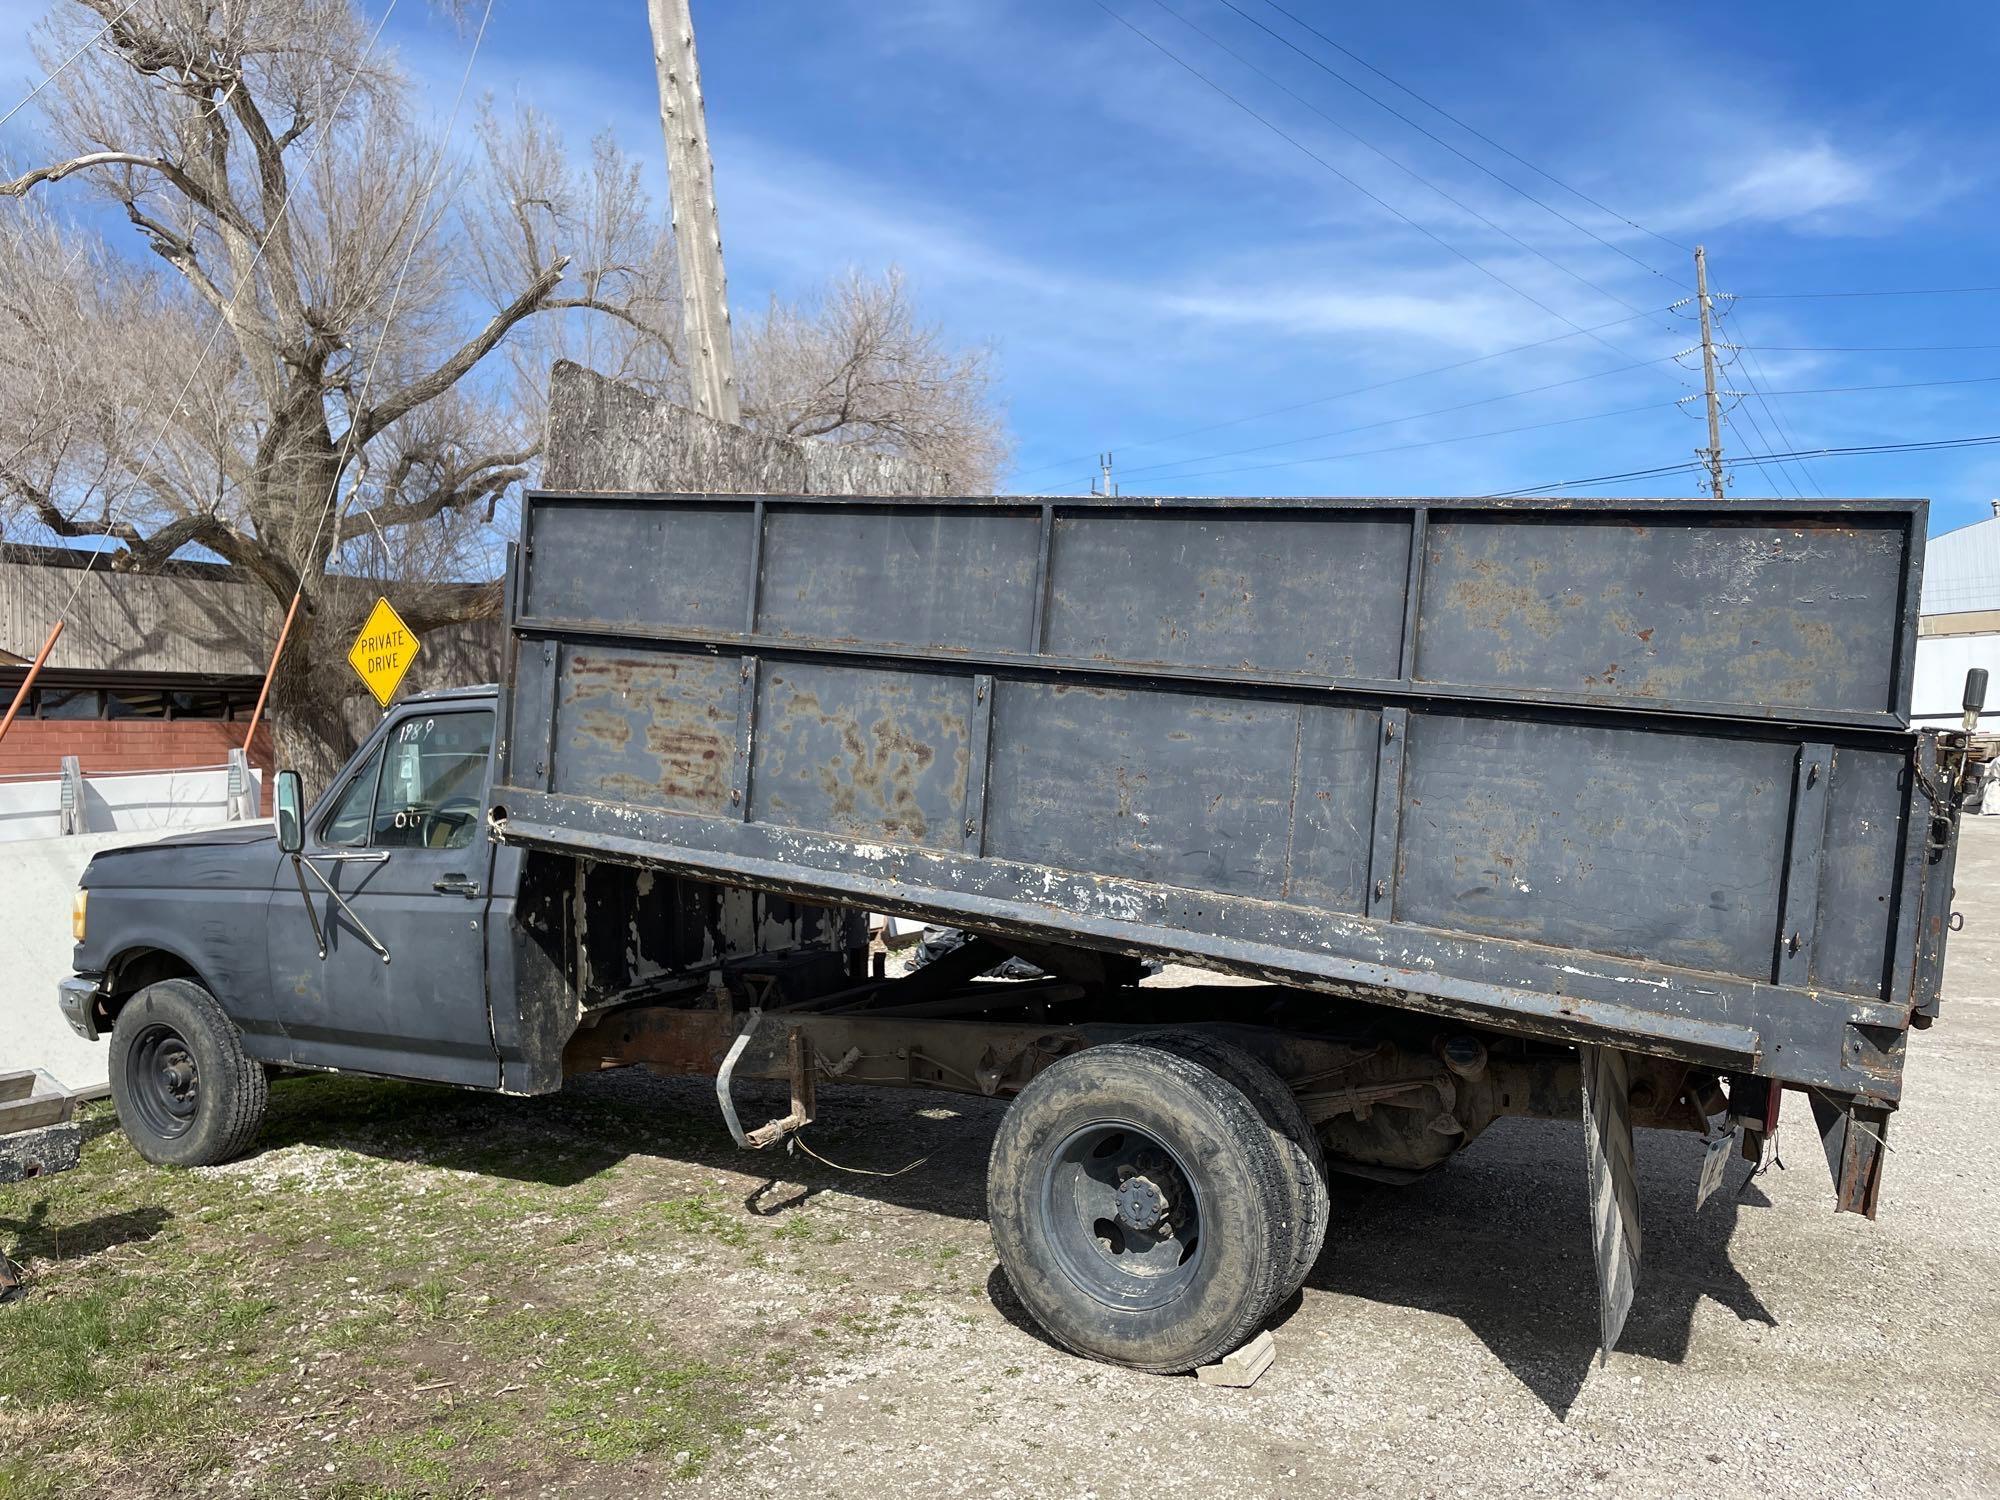 1989 Ford, F250 dually dump truck with V8 manual runs and drives